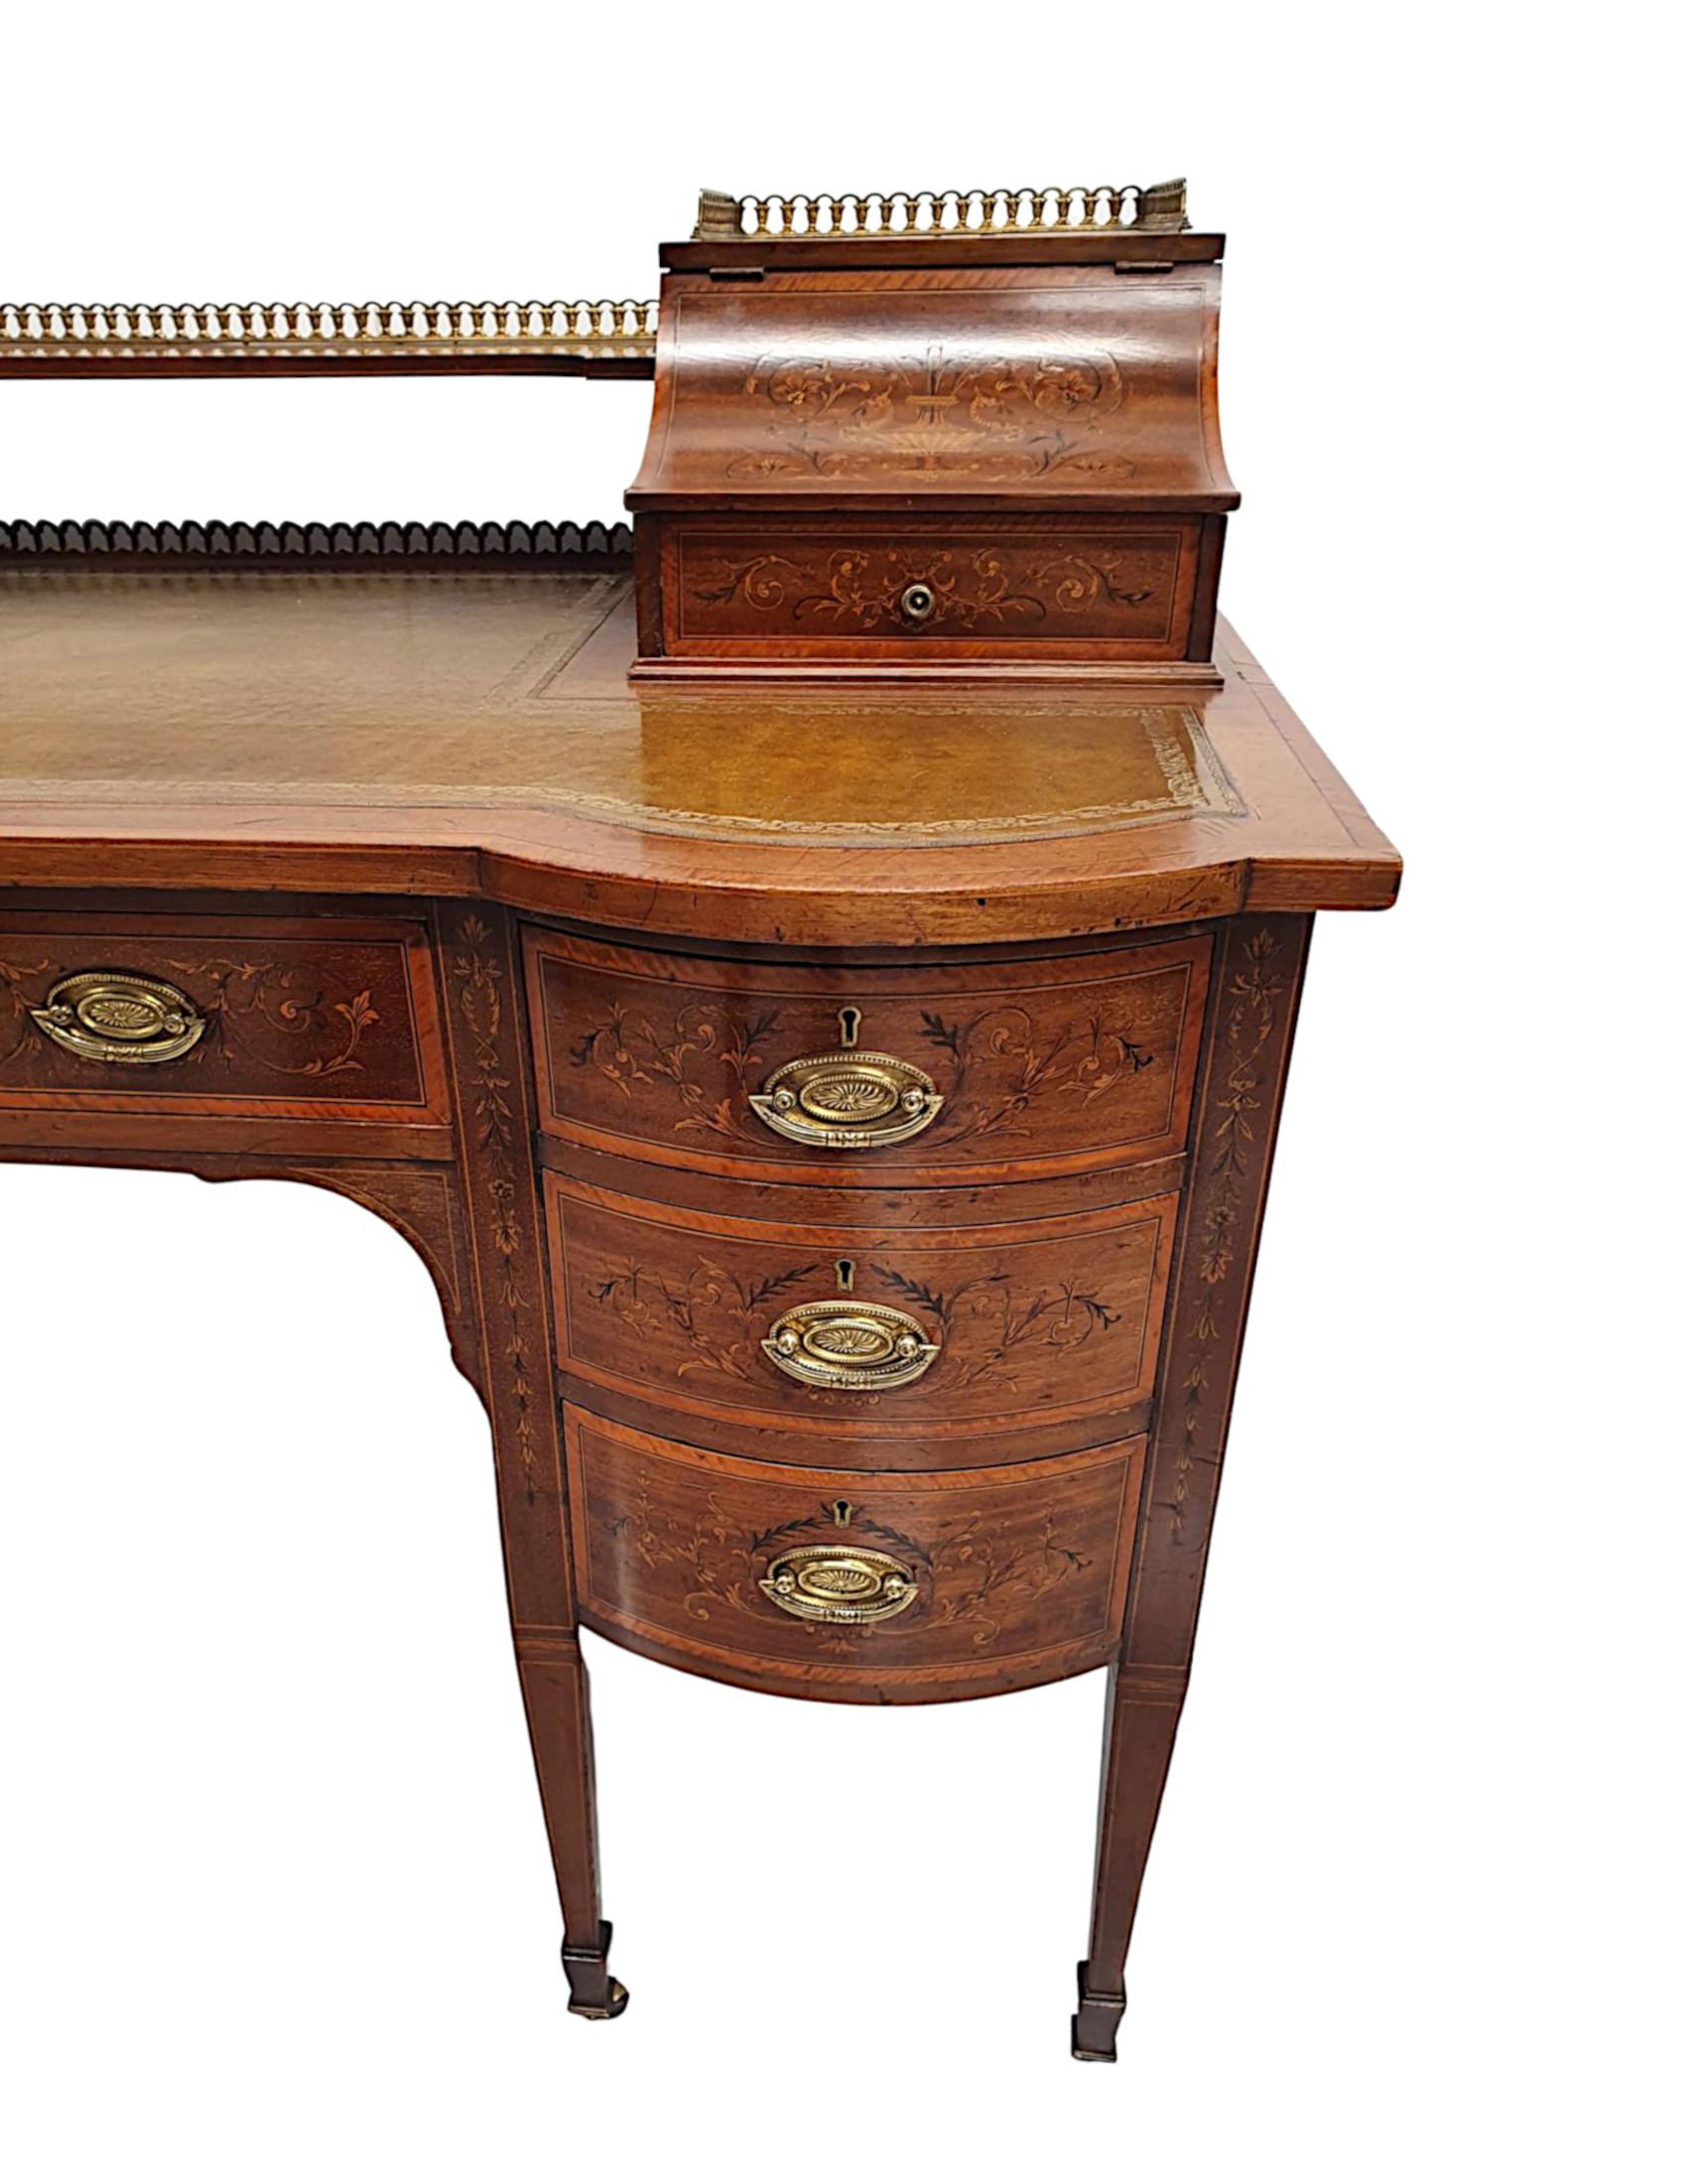 A Stunning Edwardian Desk in the Carlton House Style by Maple of London In Good Condition For Sale In Dublin, IE